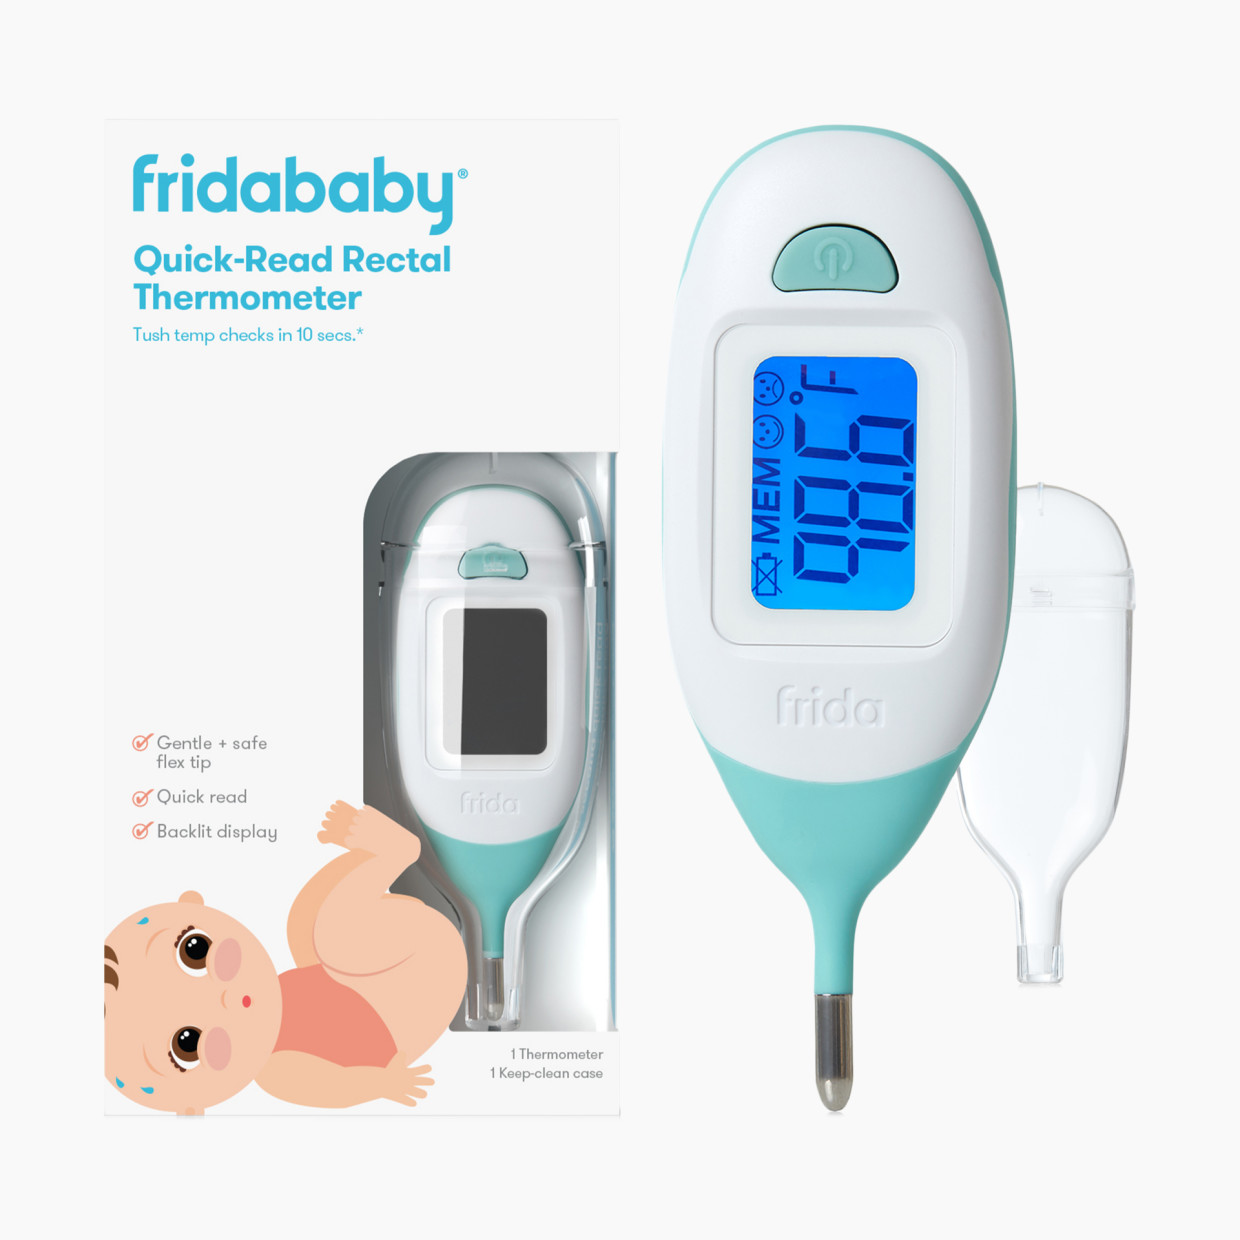 Physician's Digital Thermometer For Sale - Buy New or Used